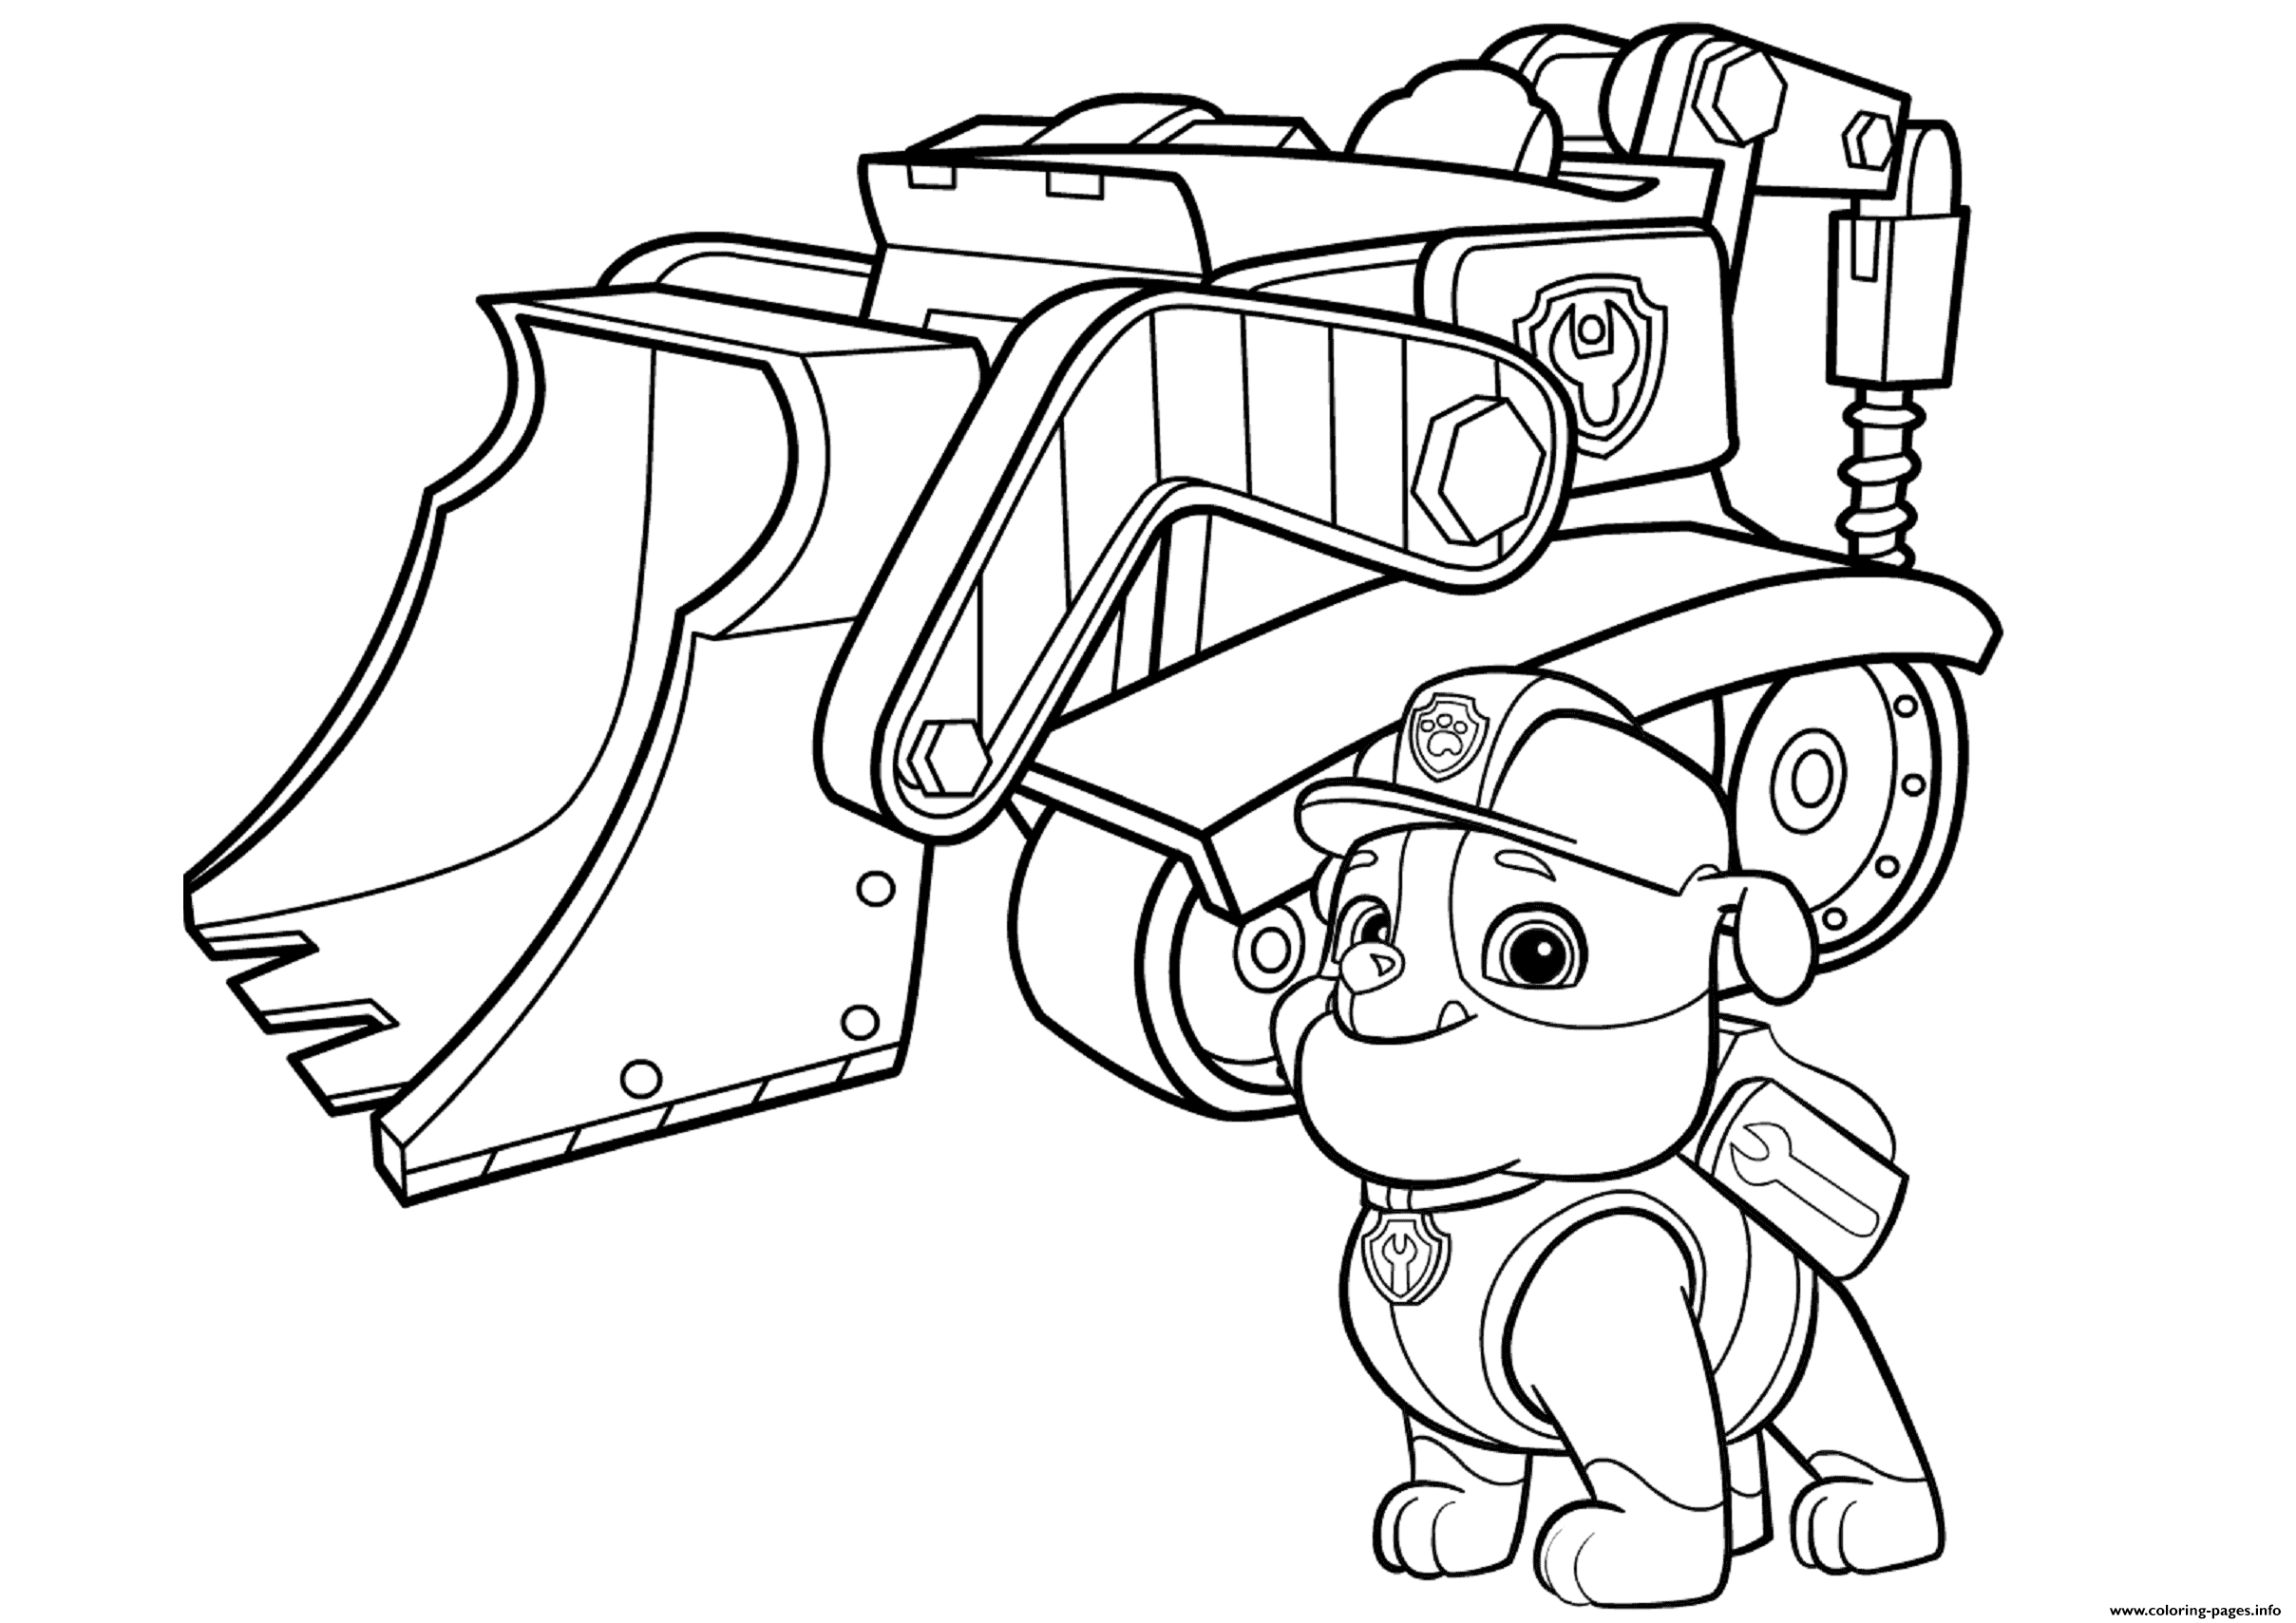 paw-patrol-coloring-pages-printable-chase-ryder-rubble-marshall-rocky-zuma-skye-everest